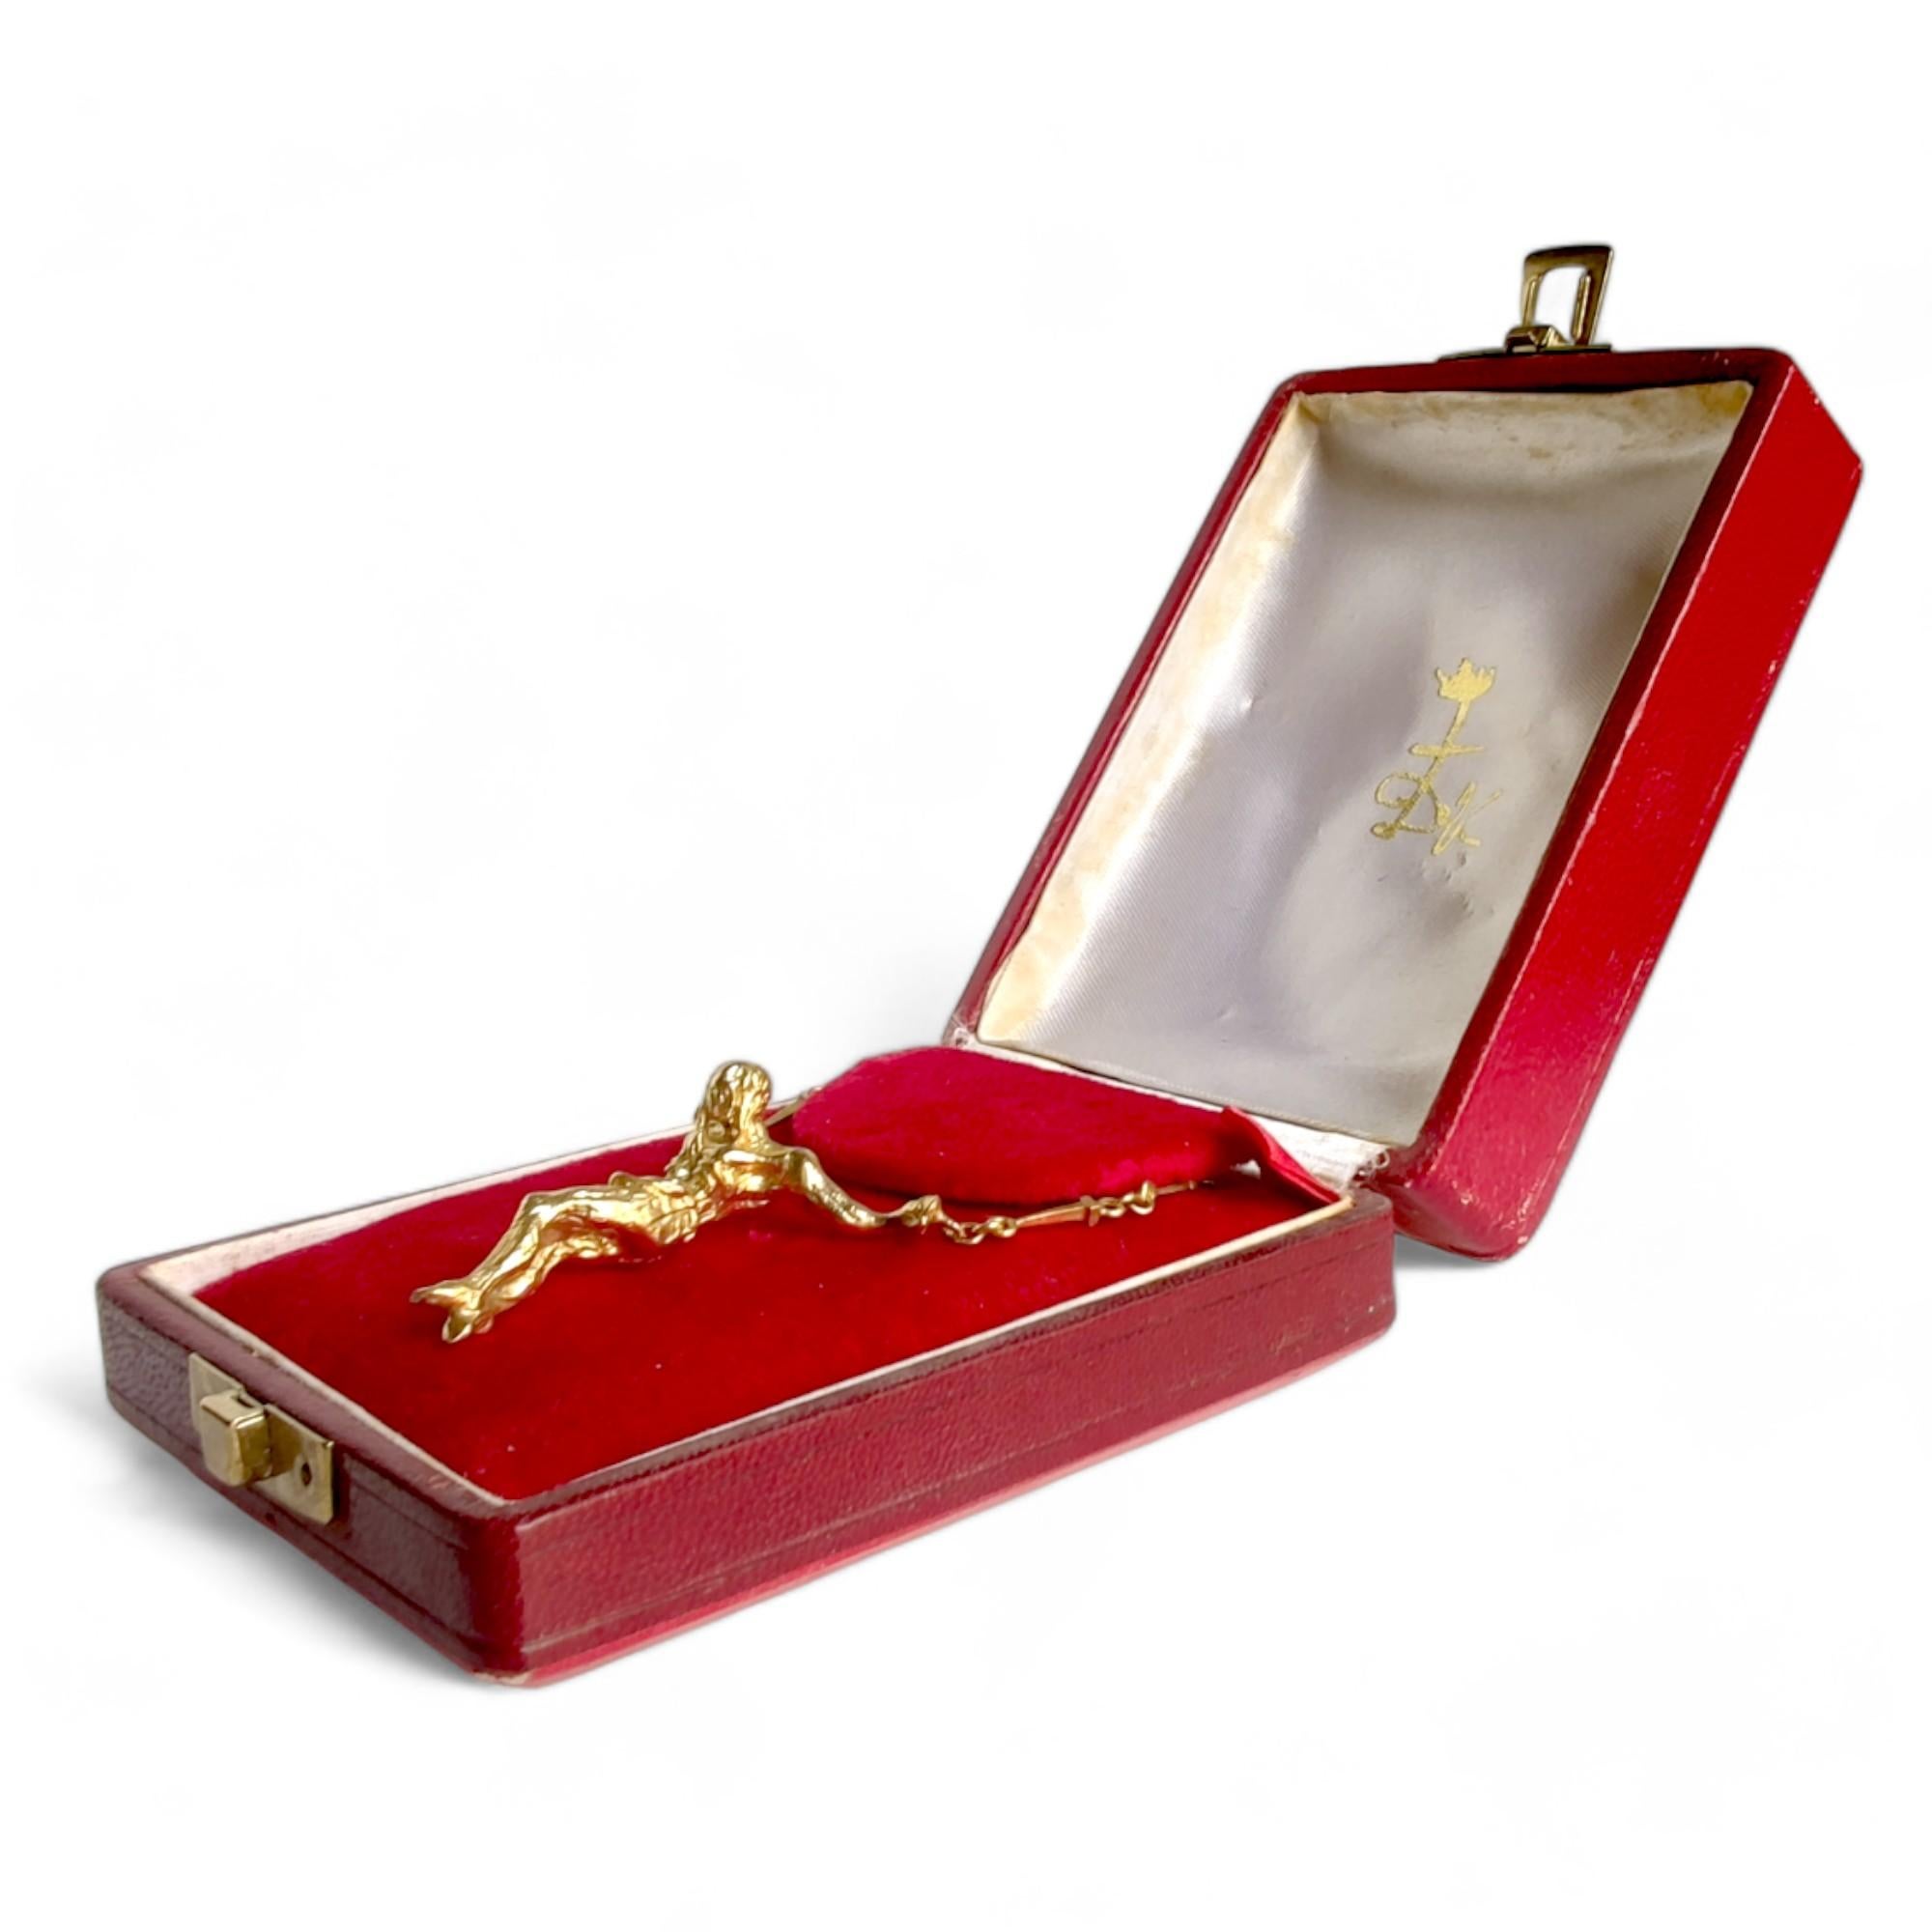 Exclusive Dalí 18K solid gold 'St. John Cross' Necklace #A-821 - With Provenance For Sale 7